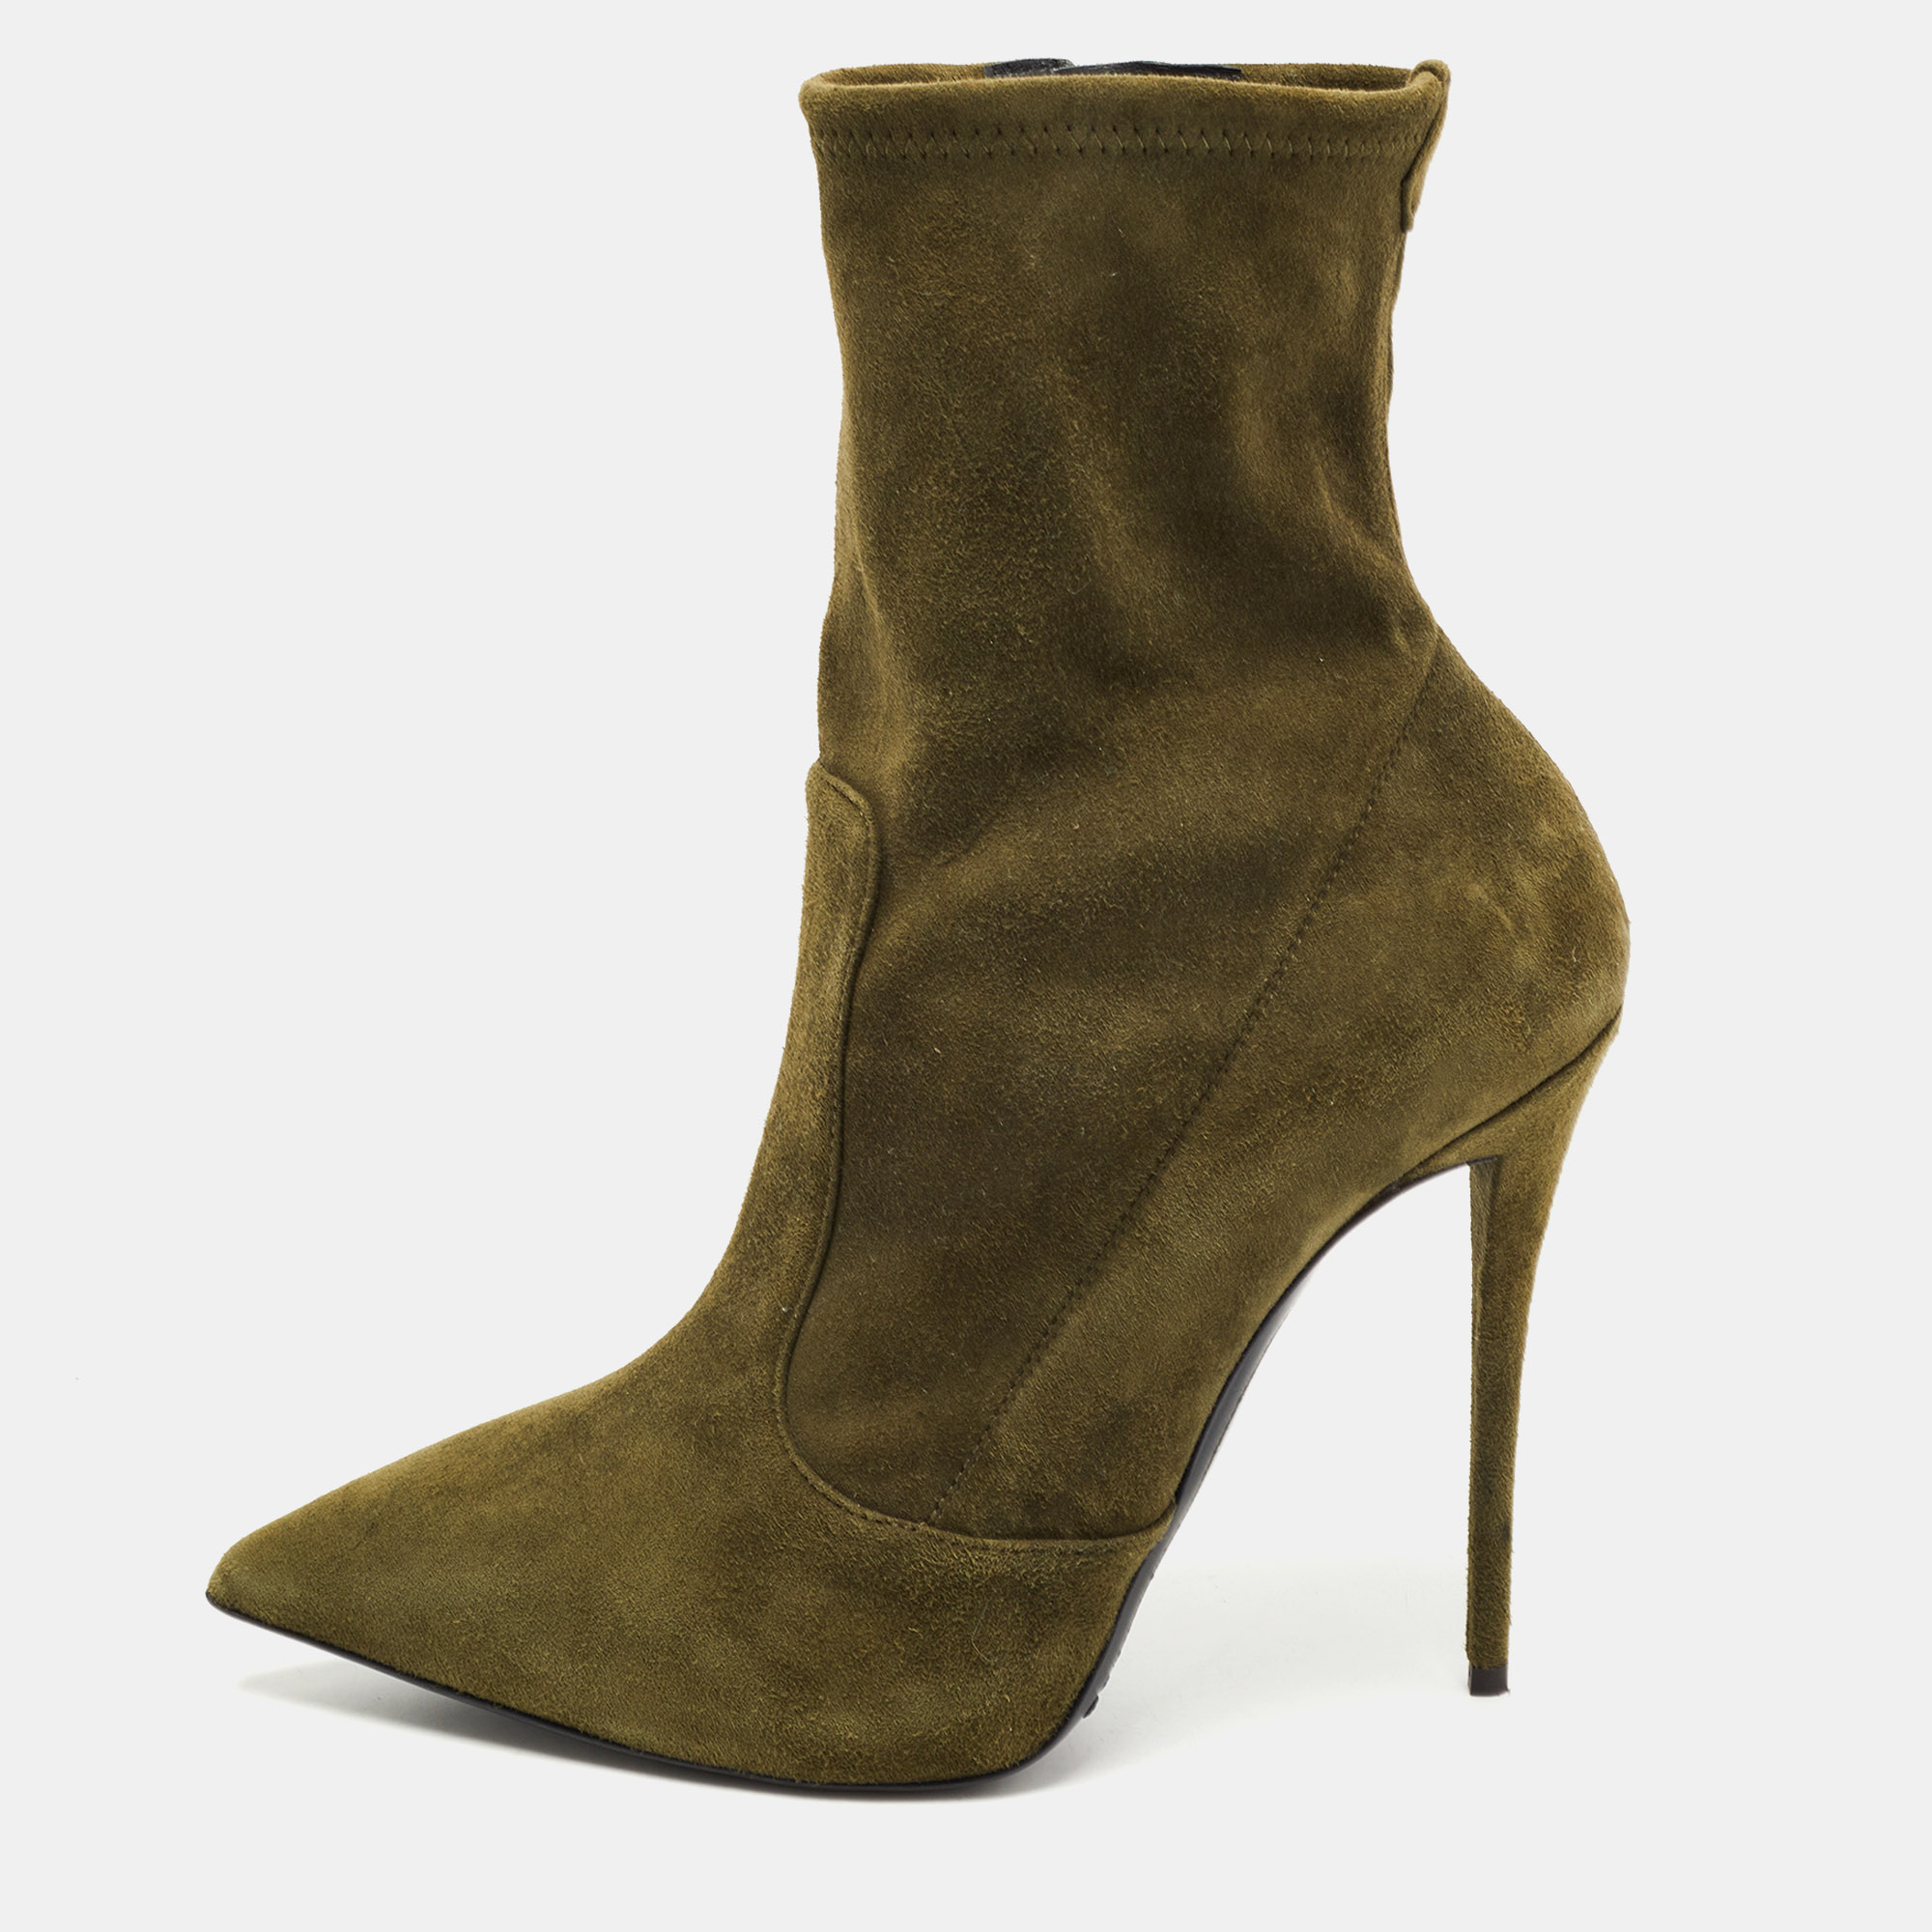 Giuseppe zanotti green suede ankle boots size 40